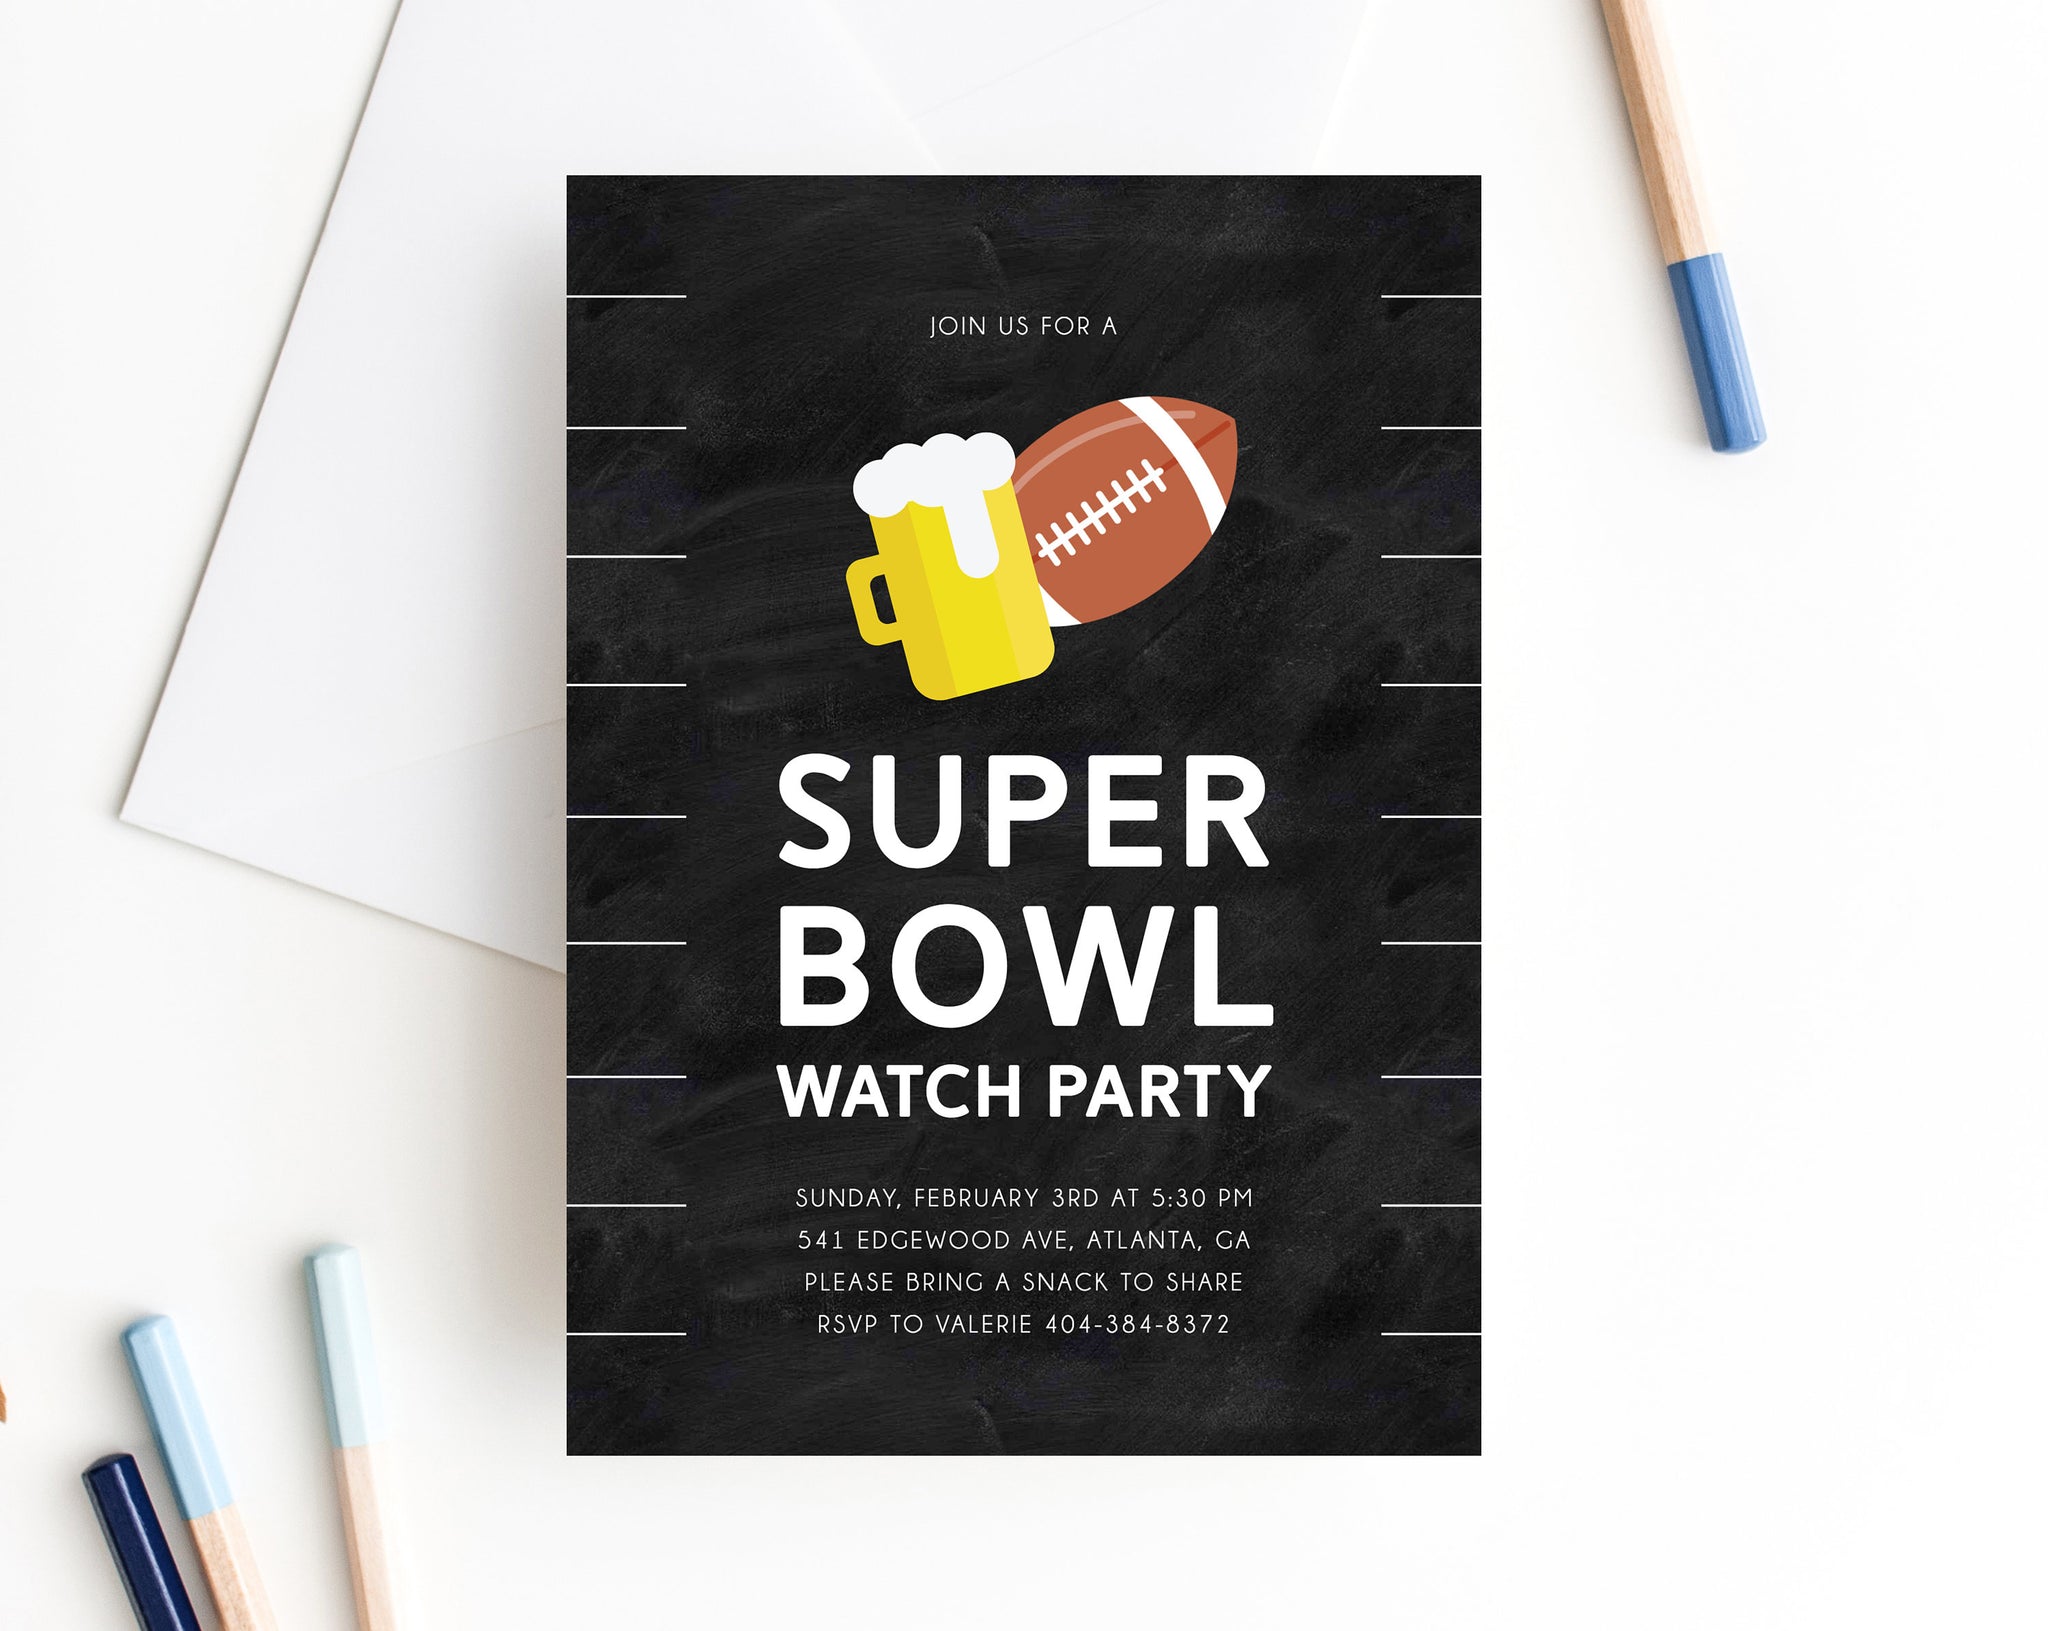 Super Bowl Watch Party Invite Template, Printable Super Bowl Party Inv